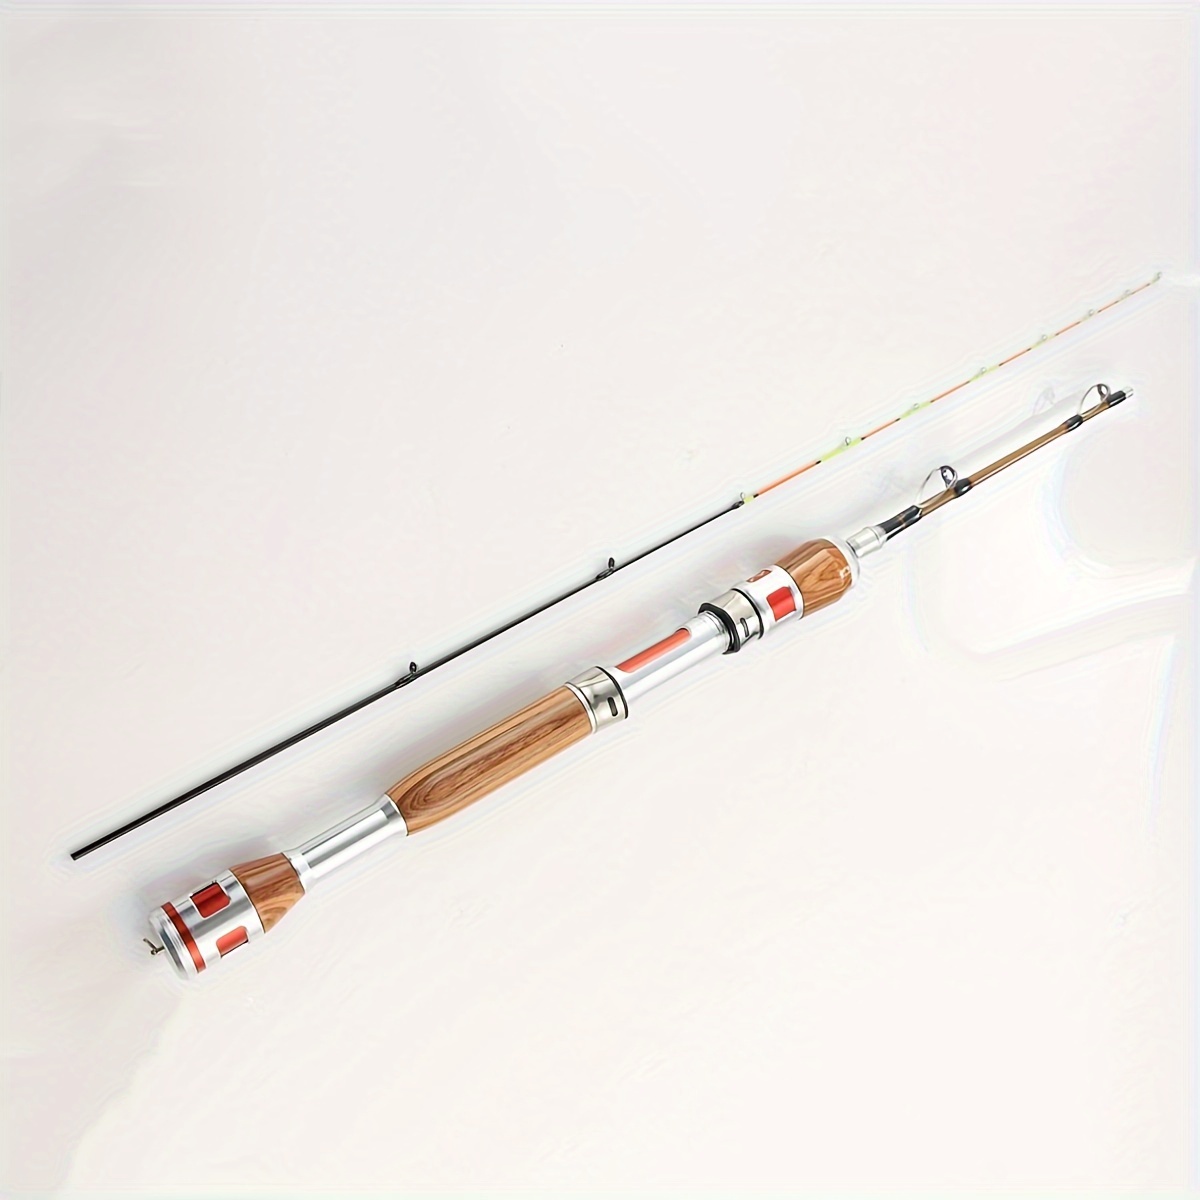 Xceed 1.98m Carbon Spinning/casting Fishing Rod M/mh - Temu